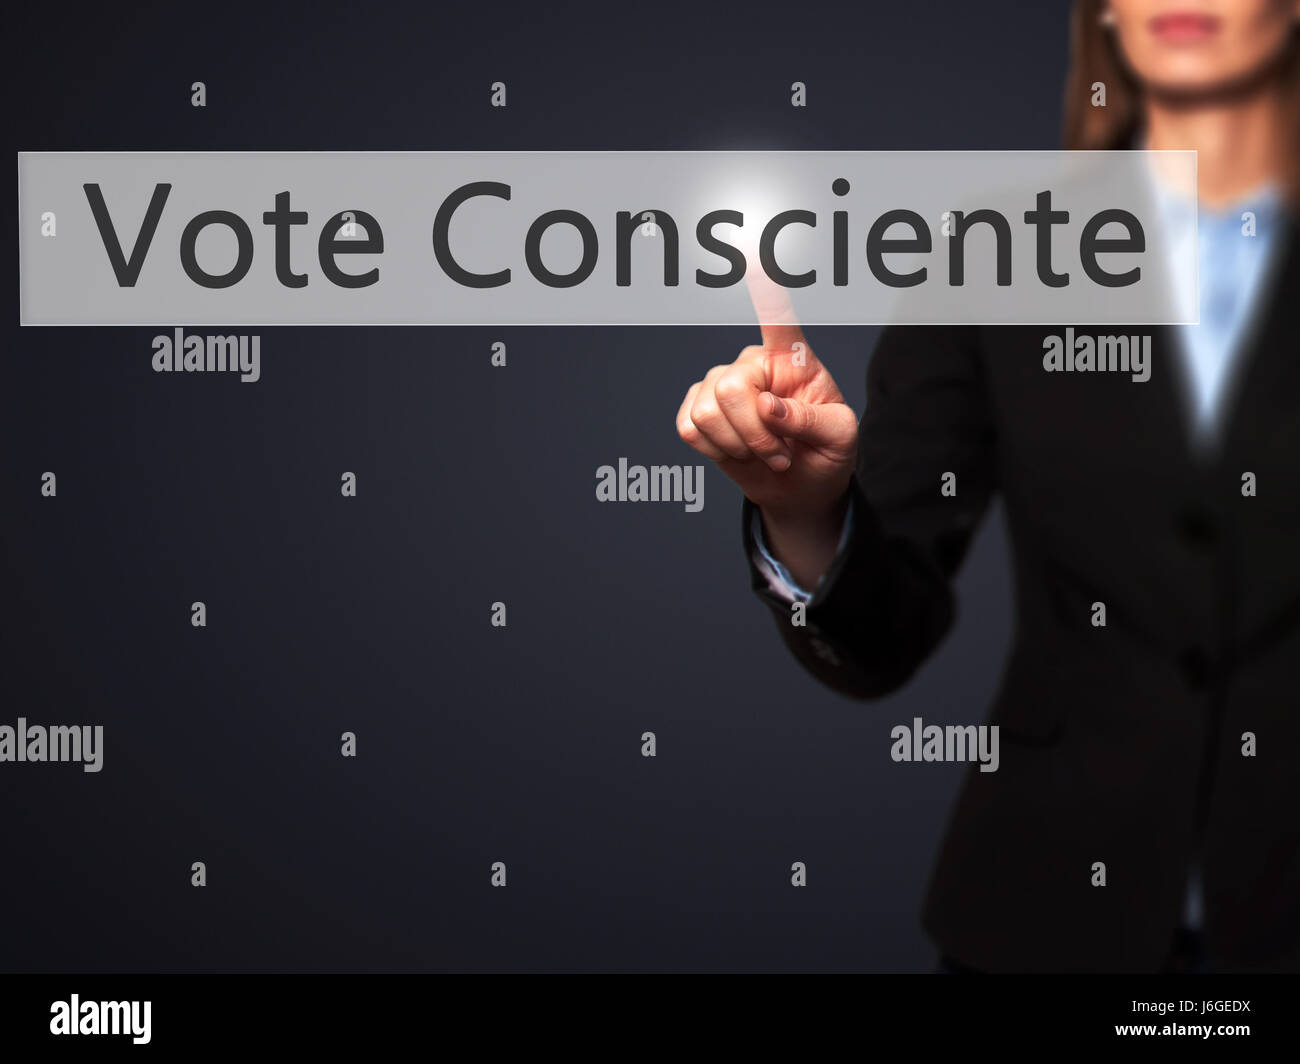 Vote Consciente - Businesswoman hand pressing button on touch screen interface. Business, technology, internet concept. Stock Photo Stock Photo